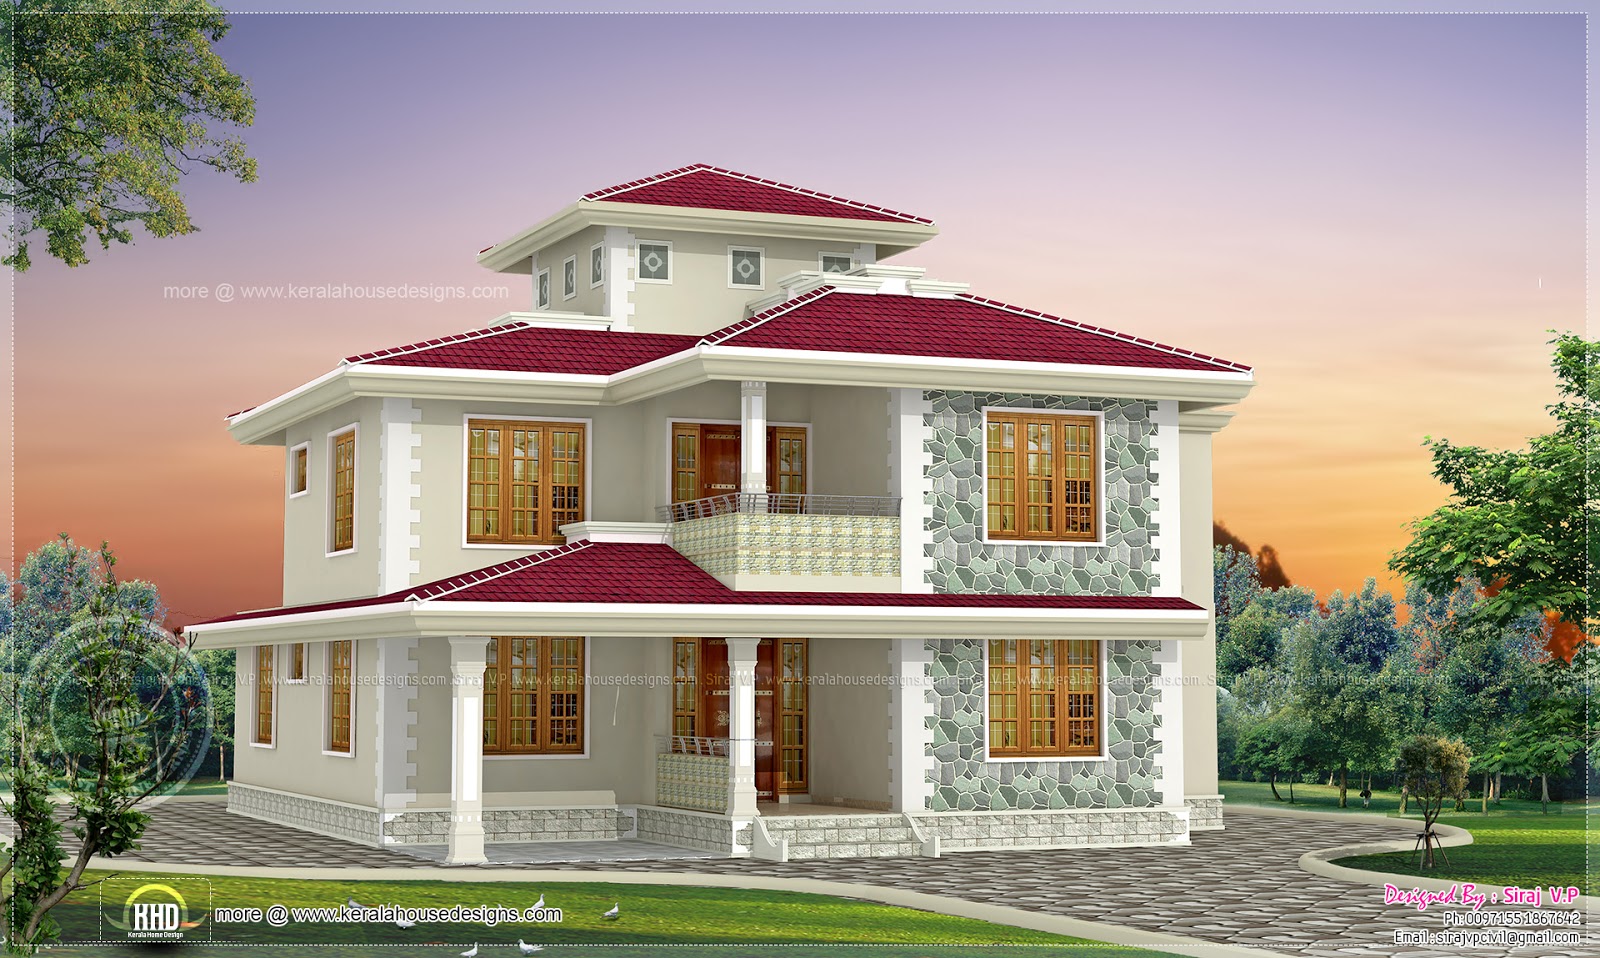 4 BHK Kerala style home design | Indian House Plans